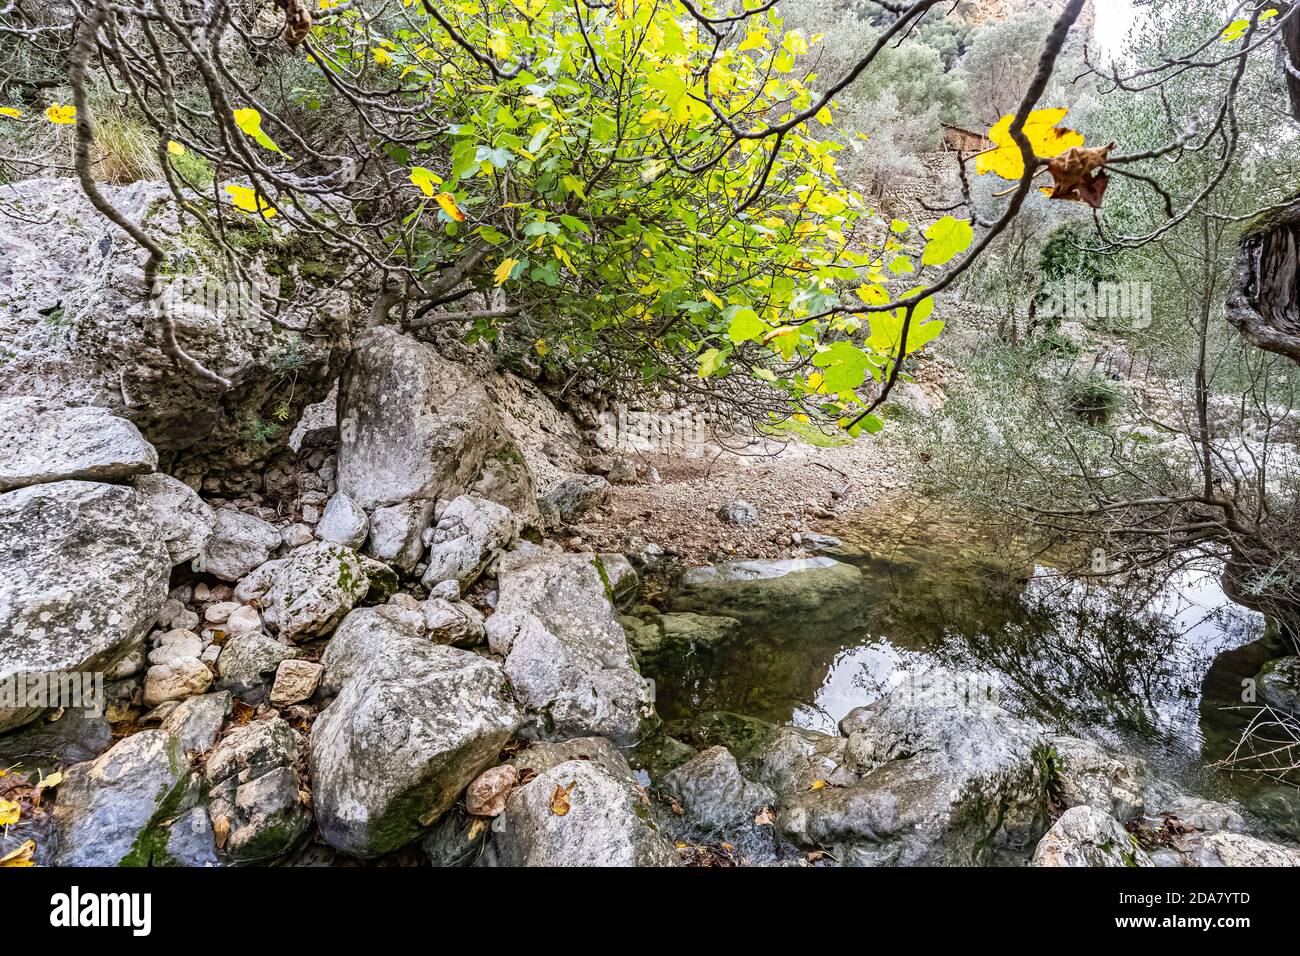 Photo of the Biniaraix ravine, in the town of Sóller, one of the most beautiful and spectacular excursion routes in Mallorca, in the Balearic Islands. Stock Photo